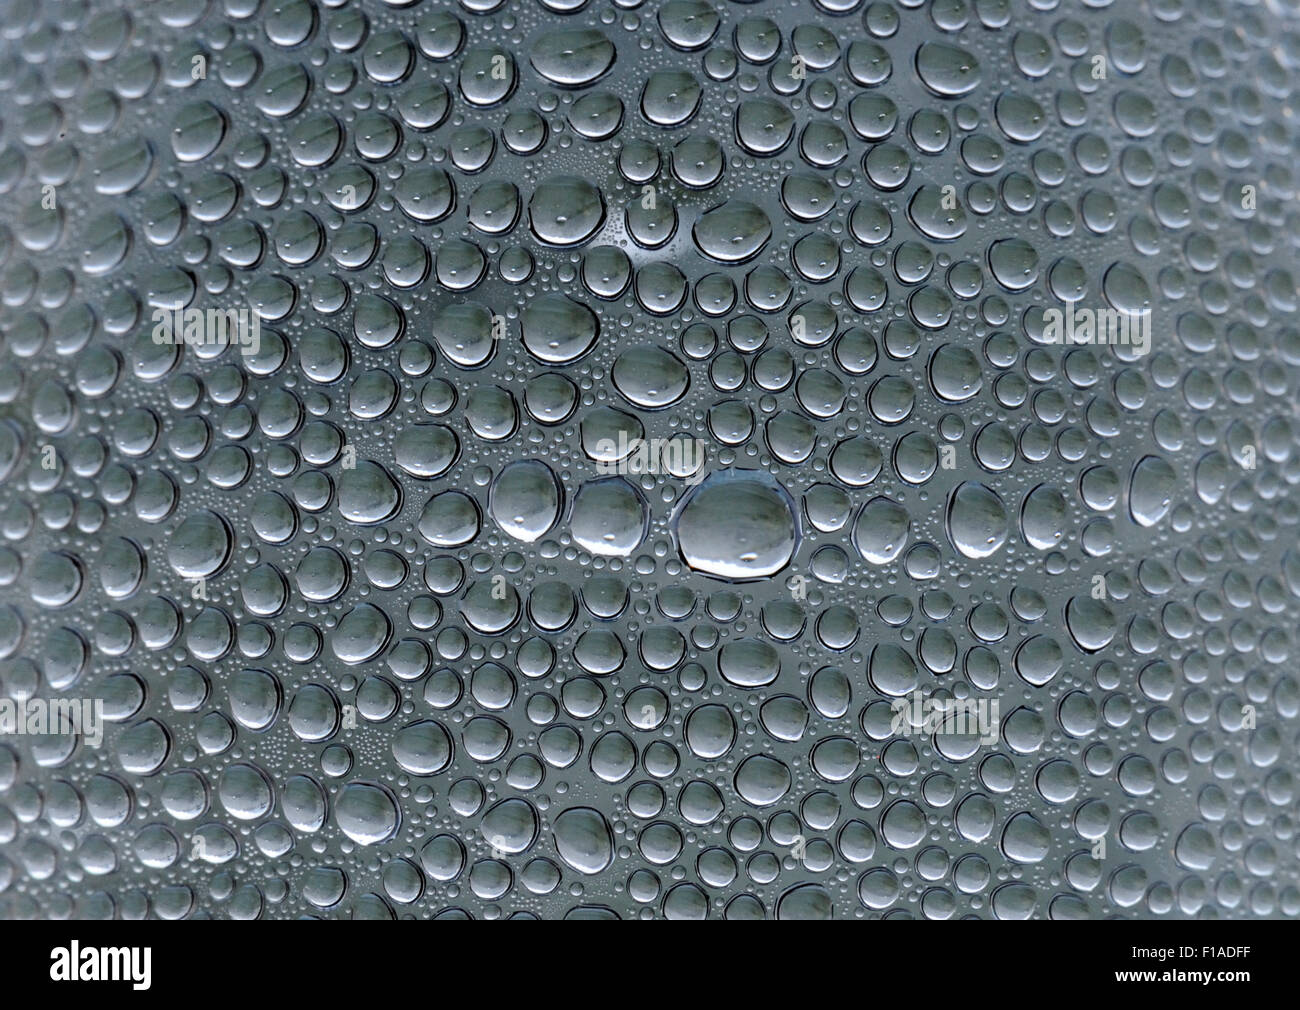 Water Drops Patterns Stock Photo